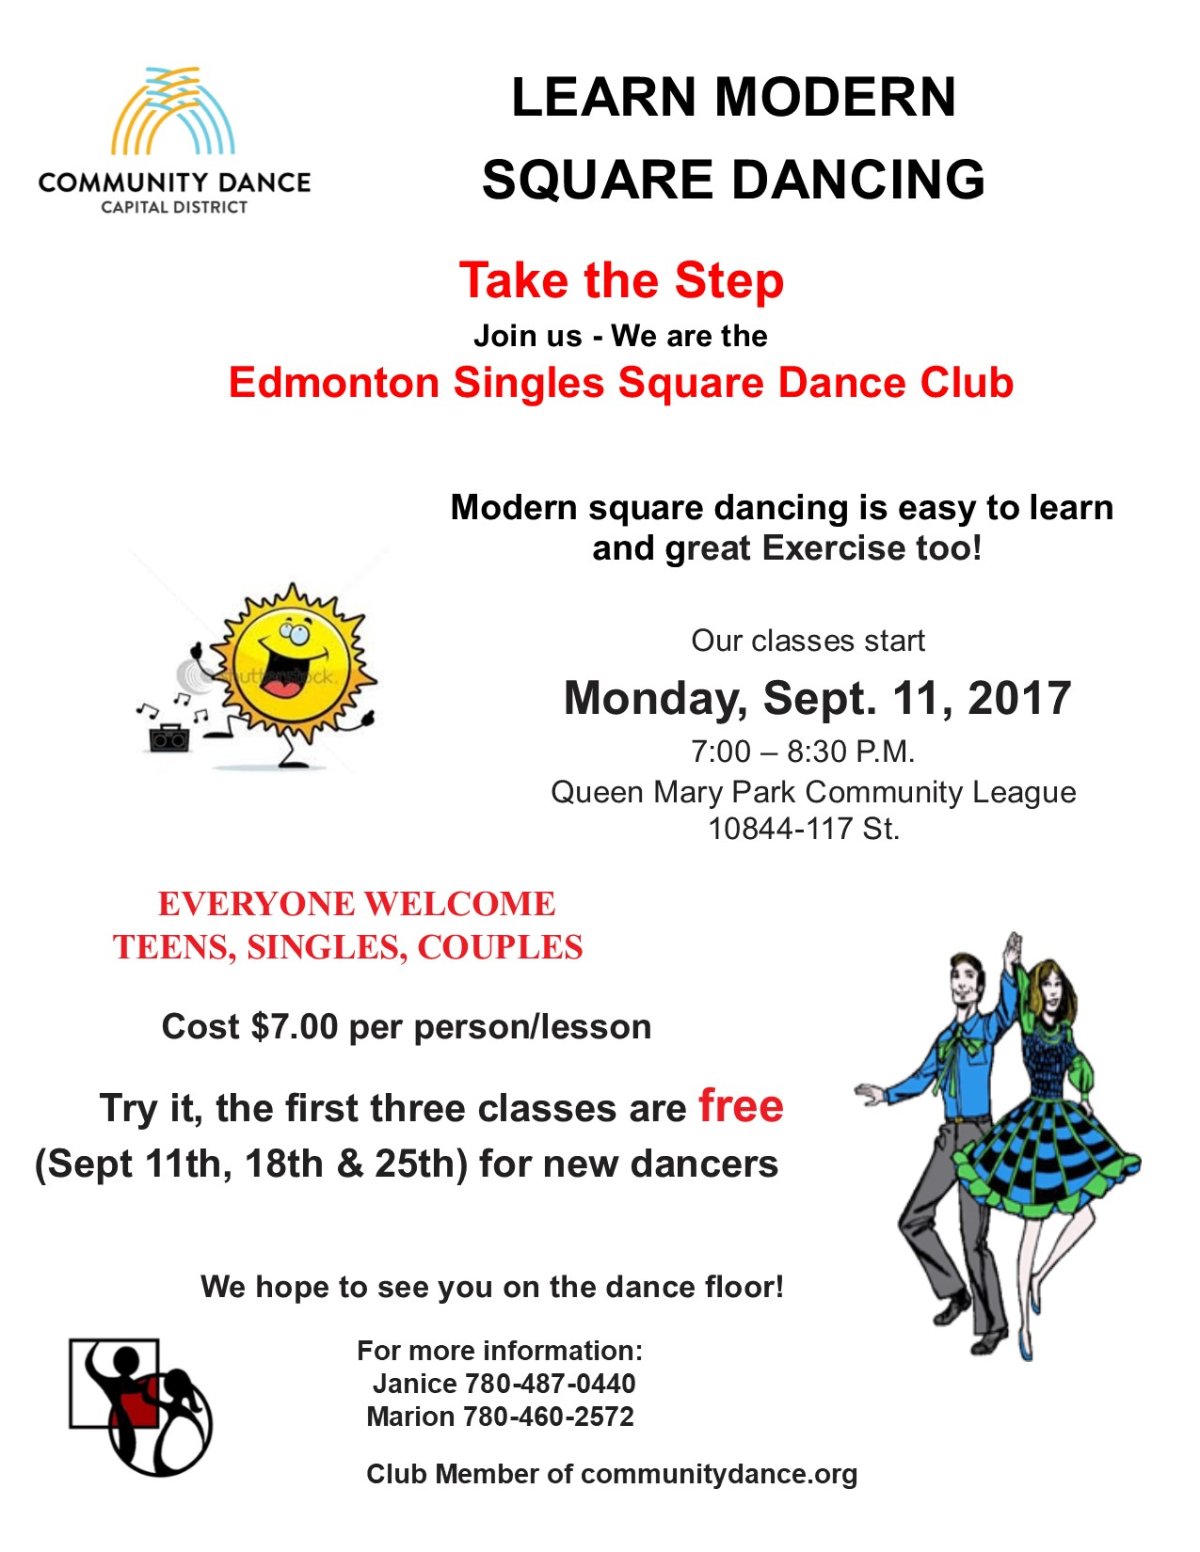 Modern Square Dancing Come And Learn Globalnews Events